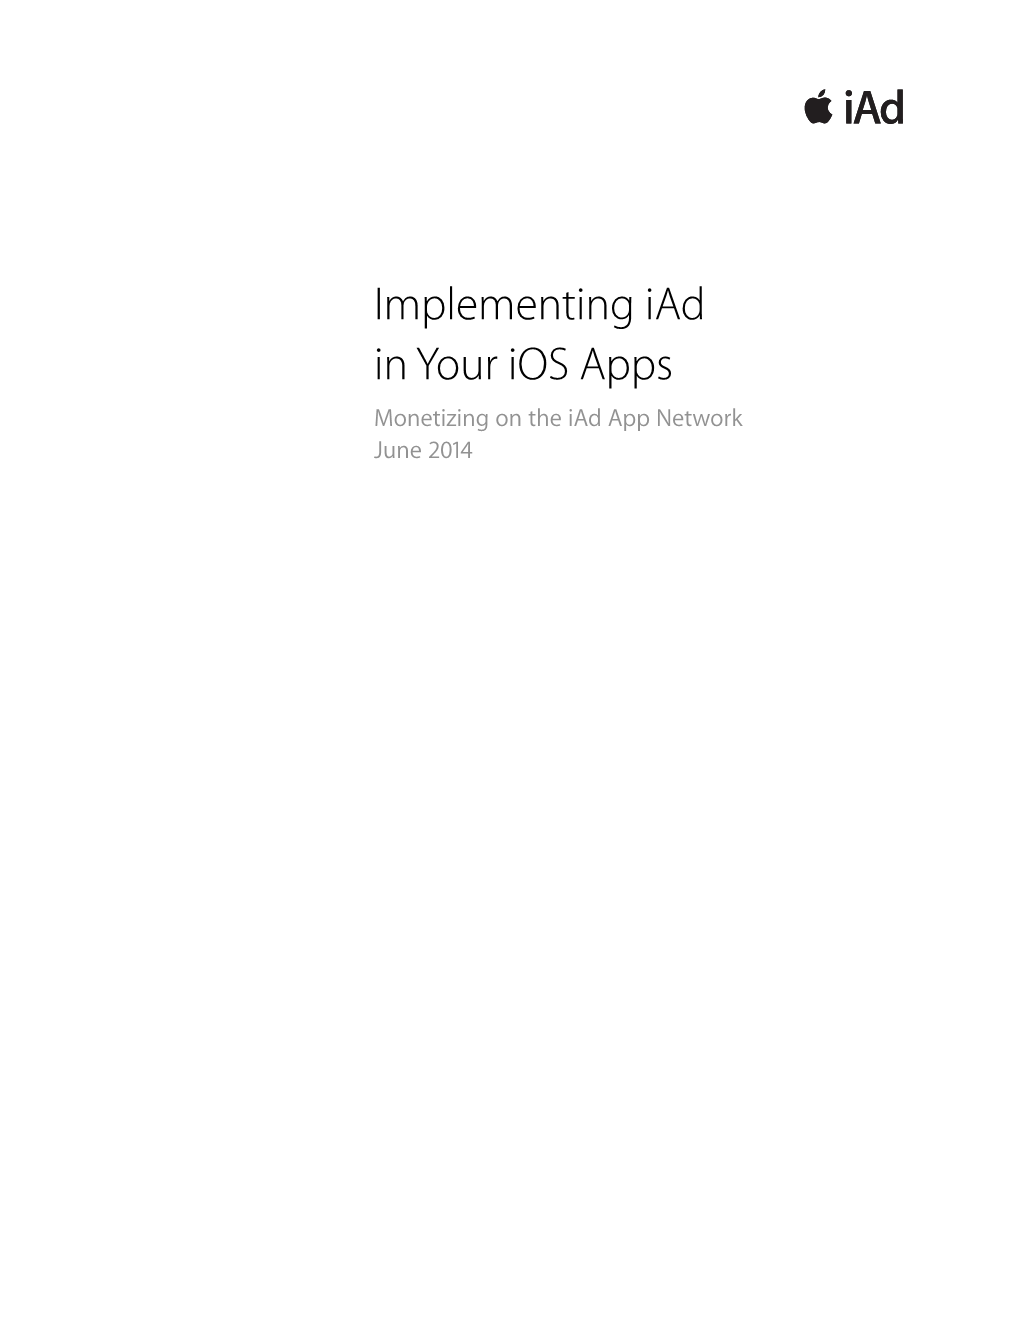 Implementing Iad in Your Ios Apps Monetizing on the Iad App Network June 2014 Implementing Iad 2 in Your Ios Apps